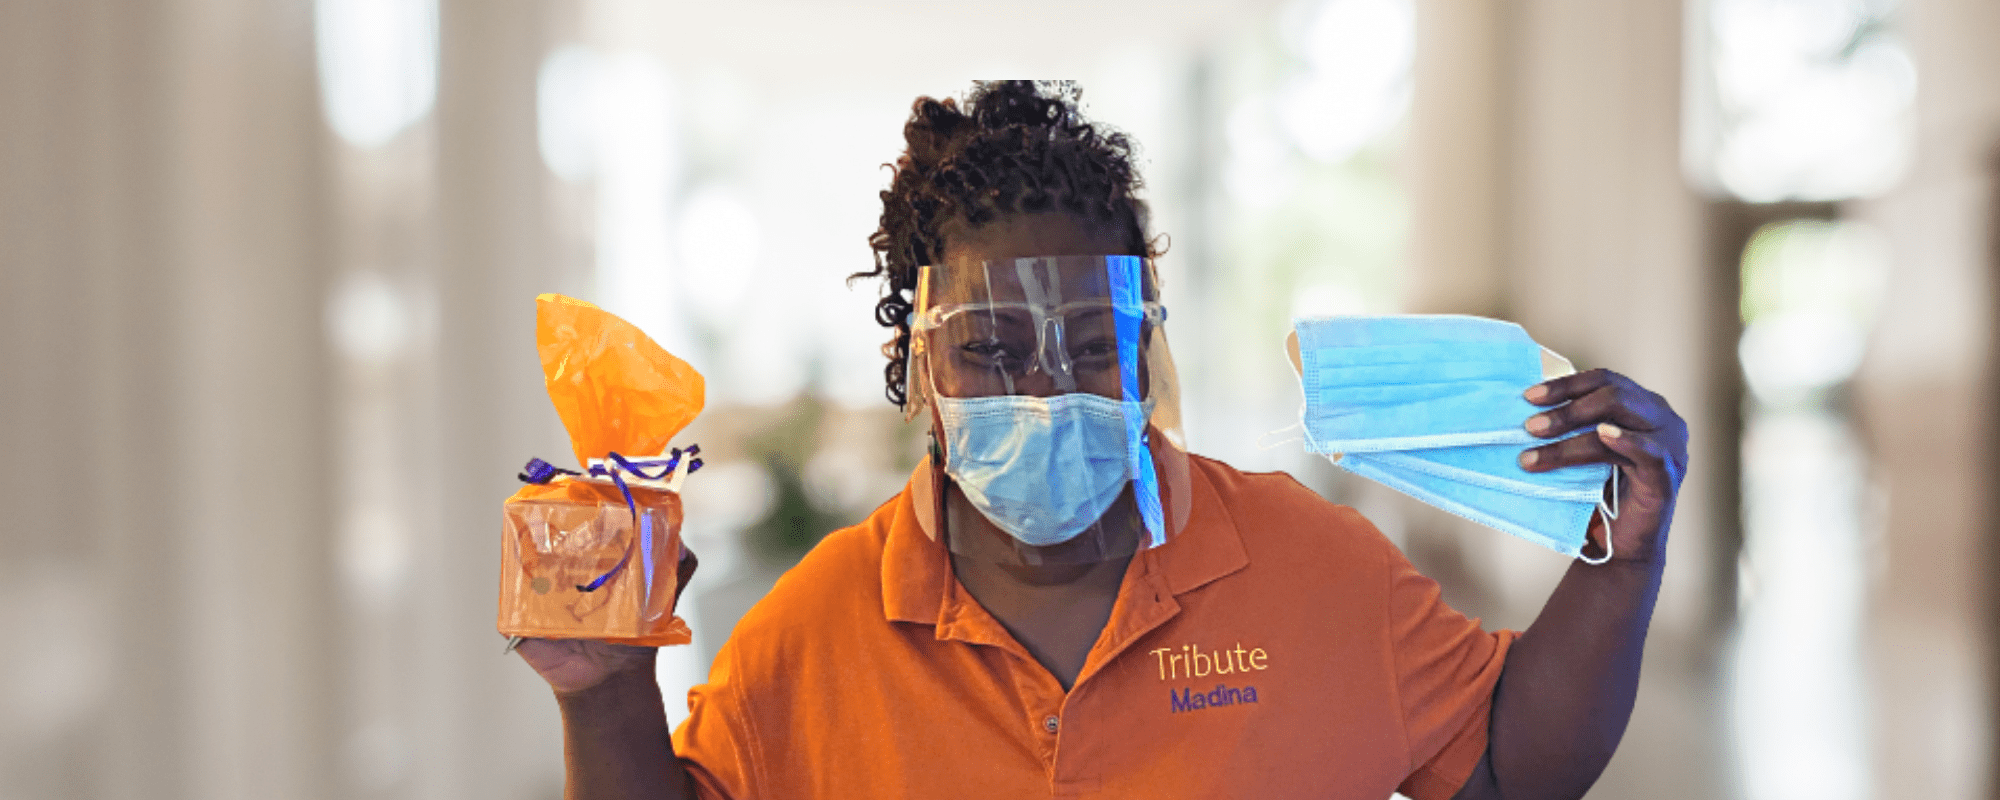 Tribute Caregiver Madina smiling with Covid mask and full PPE